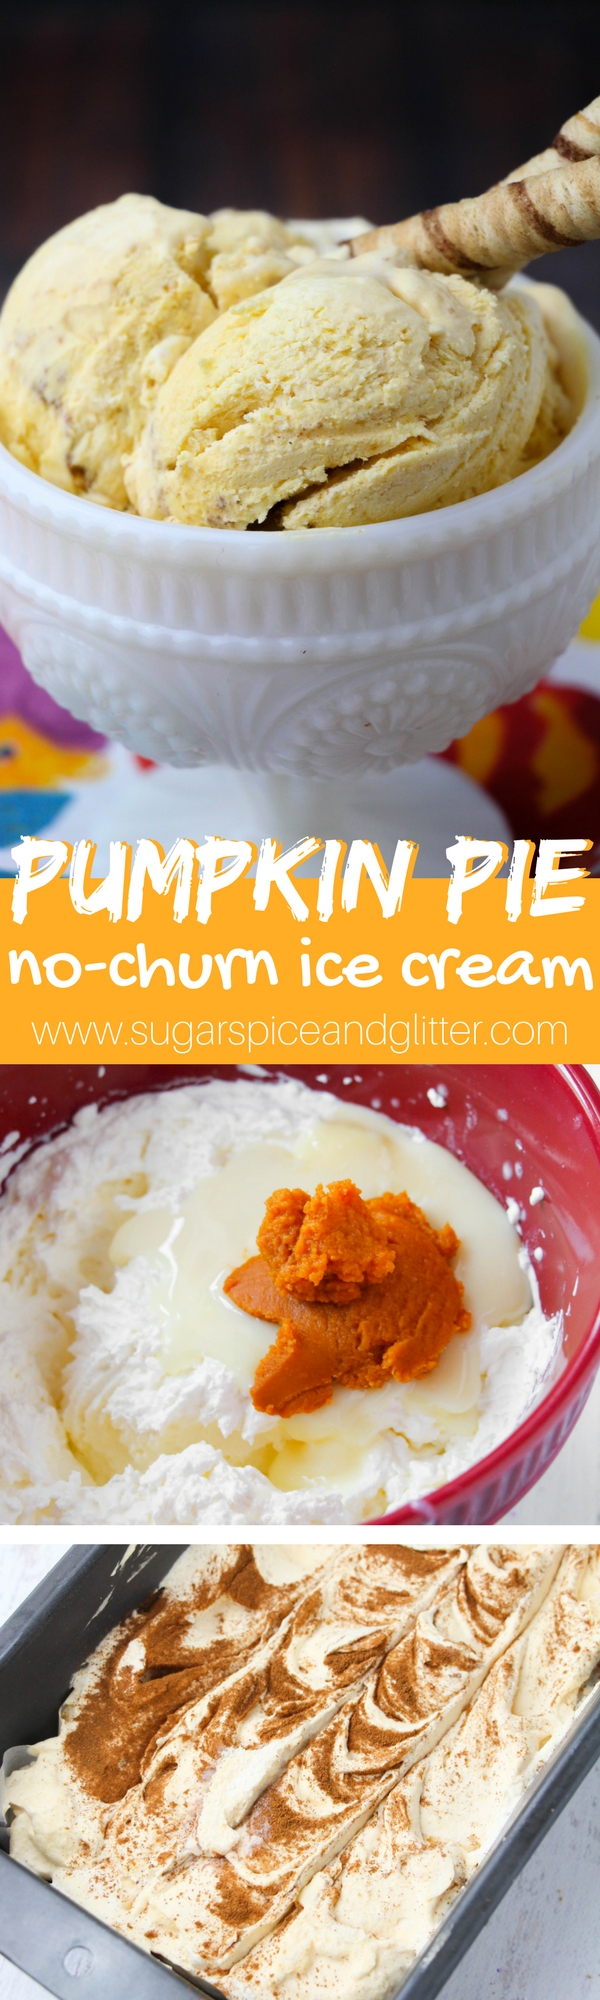 No-Churn Pumpkin Pie Ice Cream that's easier than pie! This easy homemade ice cream can be whipped up in less than 10 minutes without an ice cream machine, making it the perfect low-fuss Thanksgiving dessert